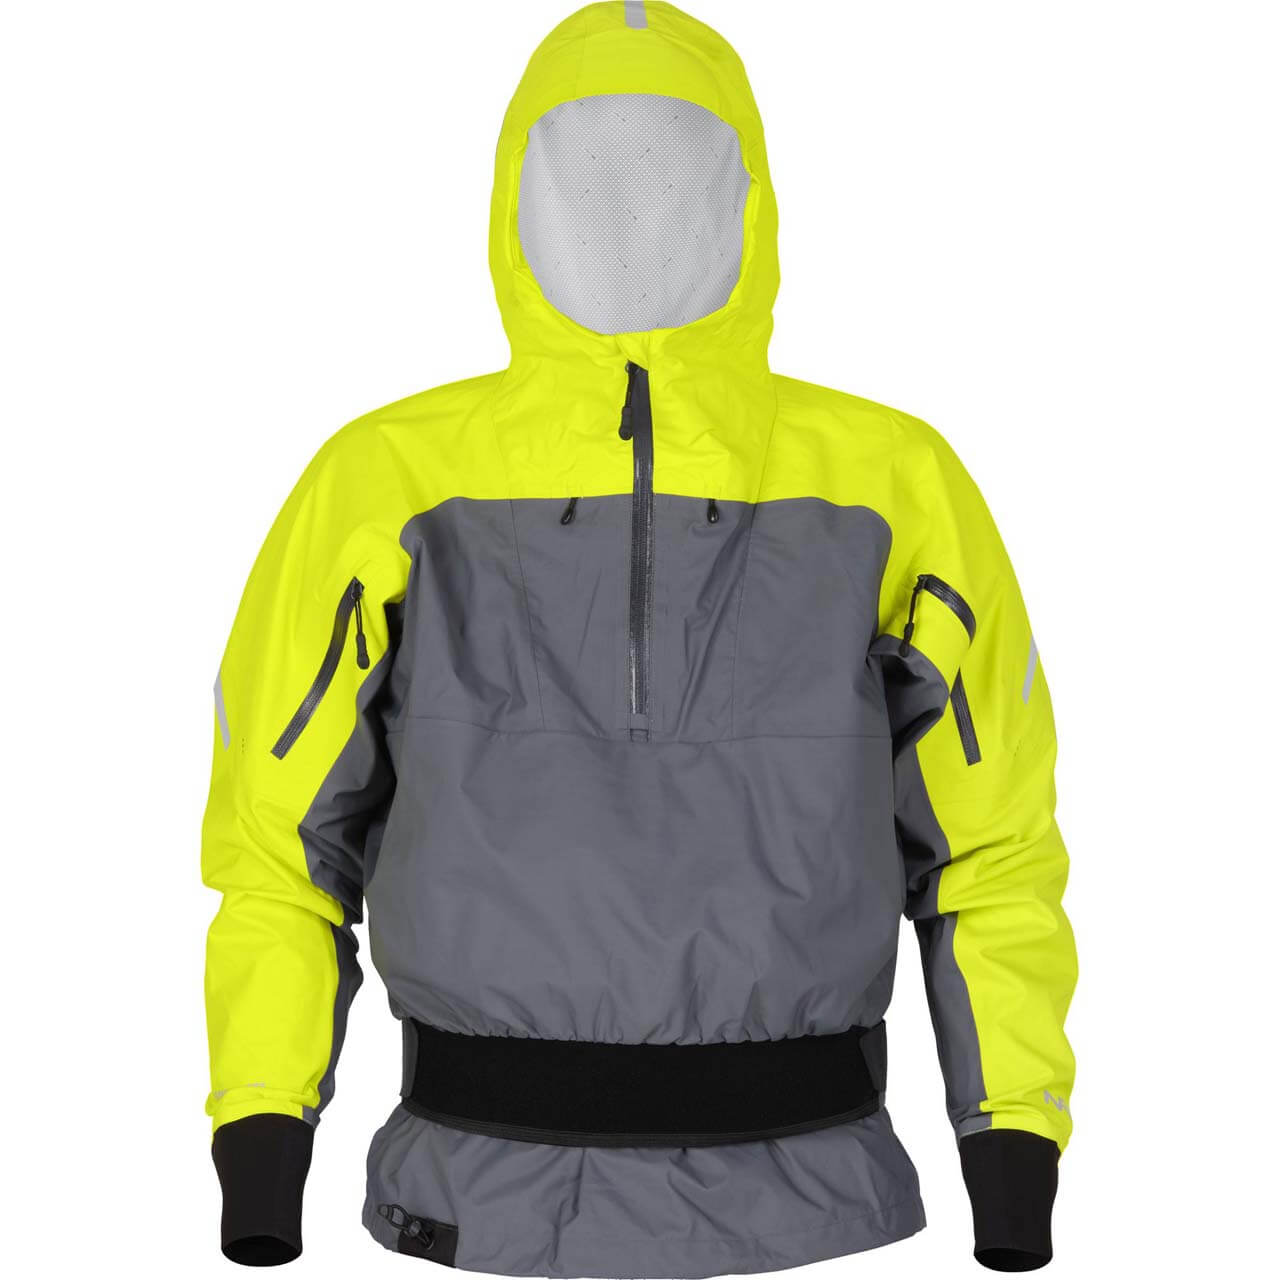 NRS Riptide Touring Paddeljacke - Chartreuse/Gray, S von NRS